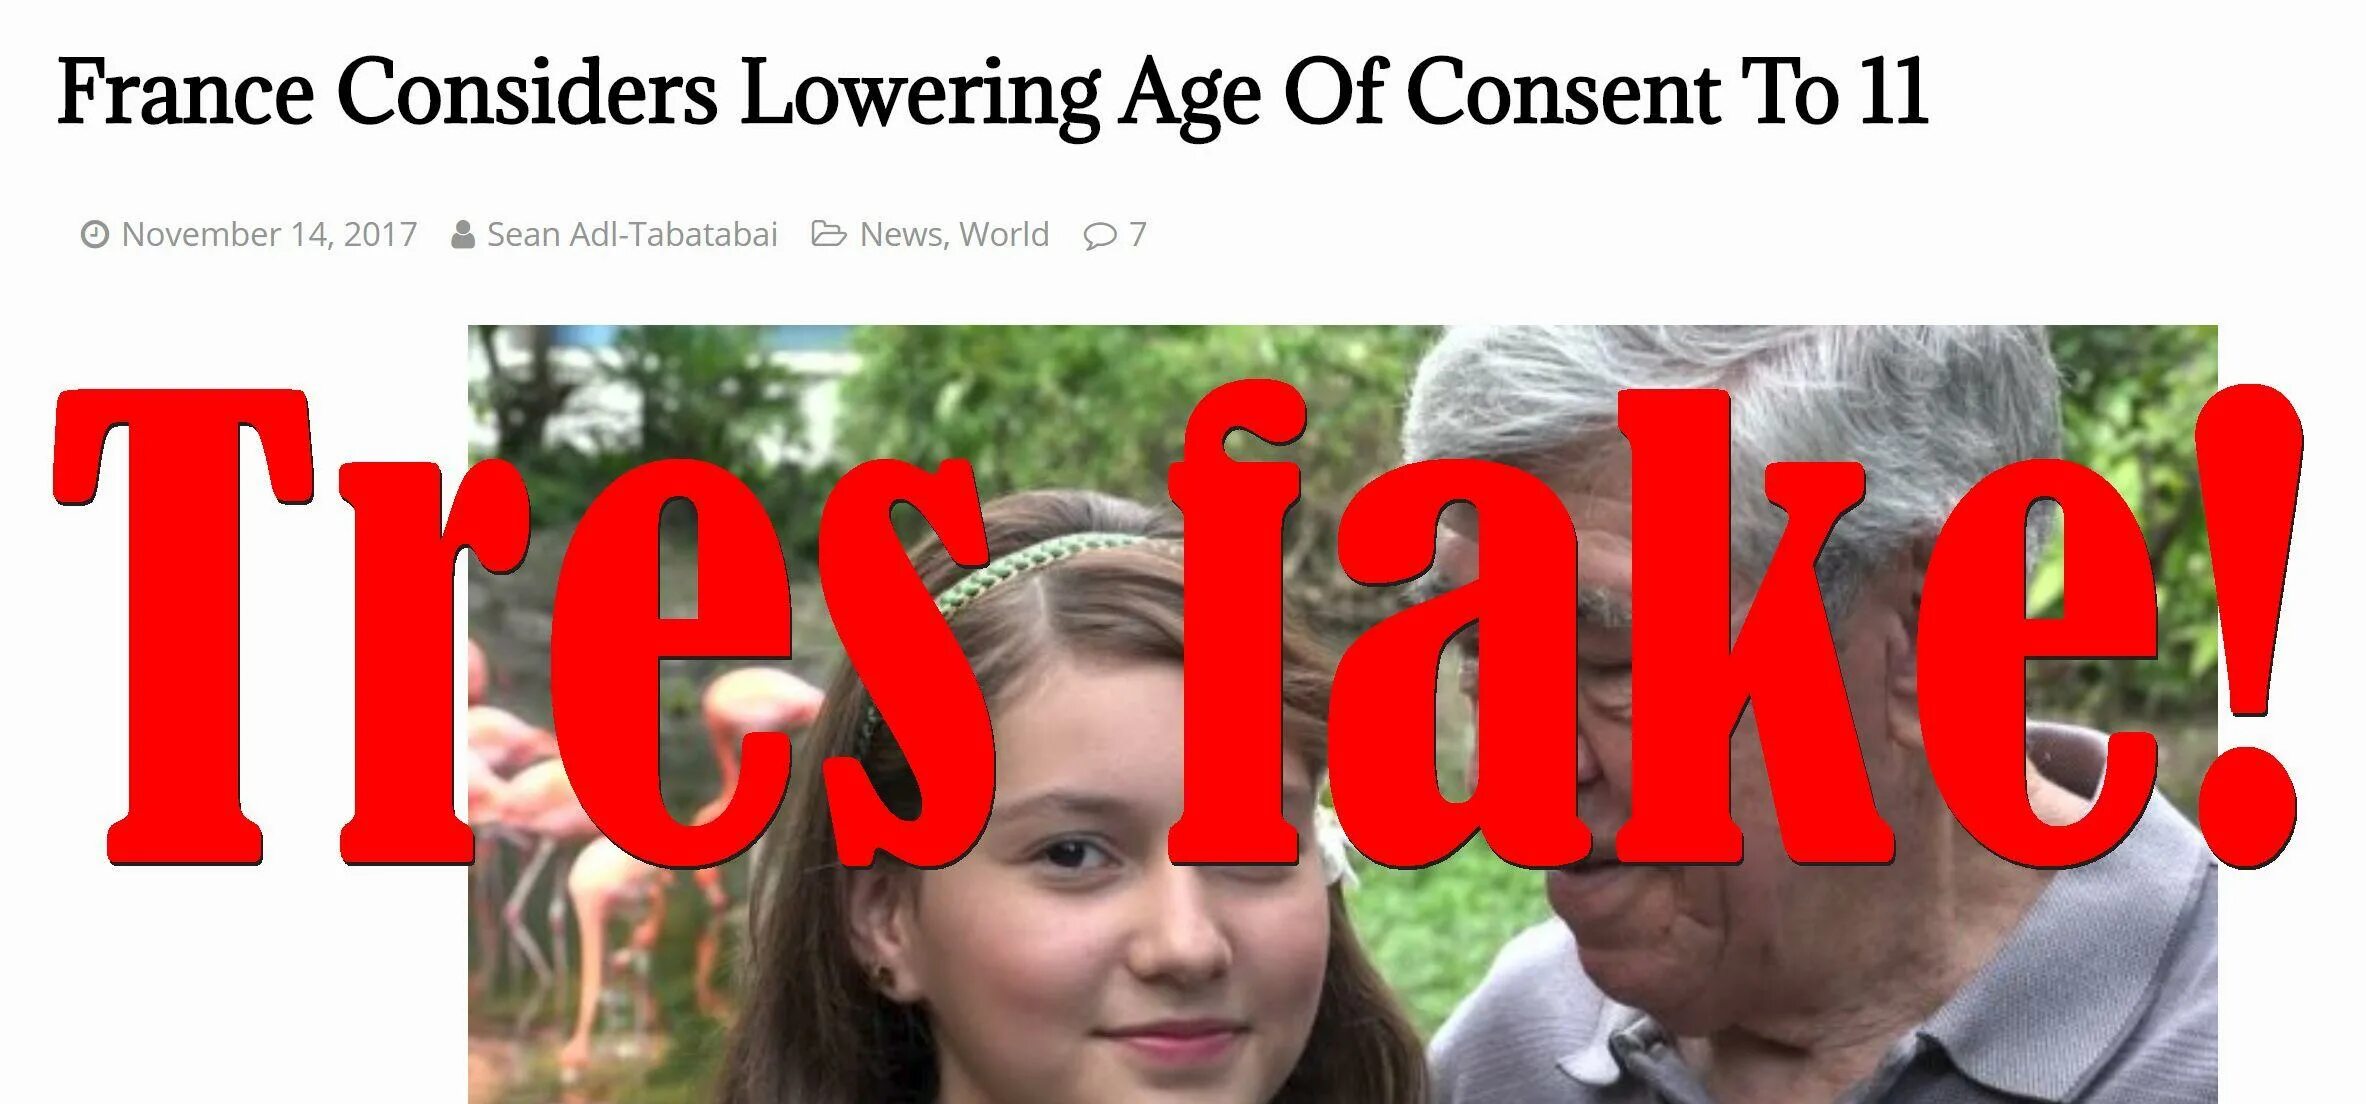 Age of consent in Italy. Age of consent